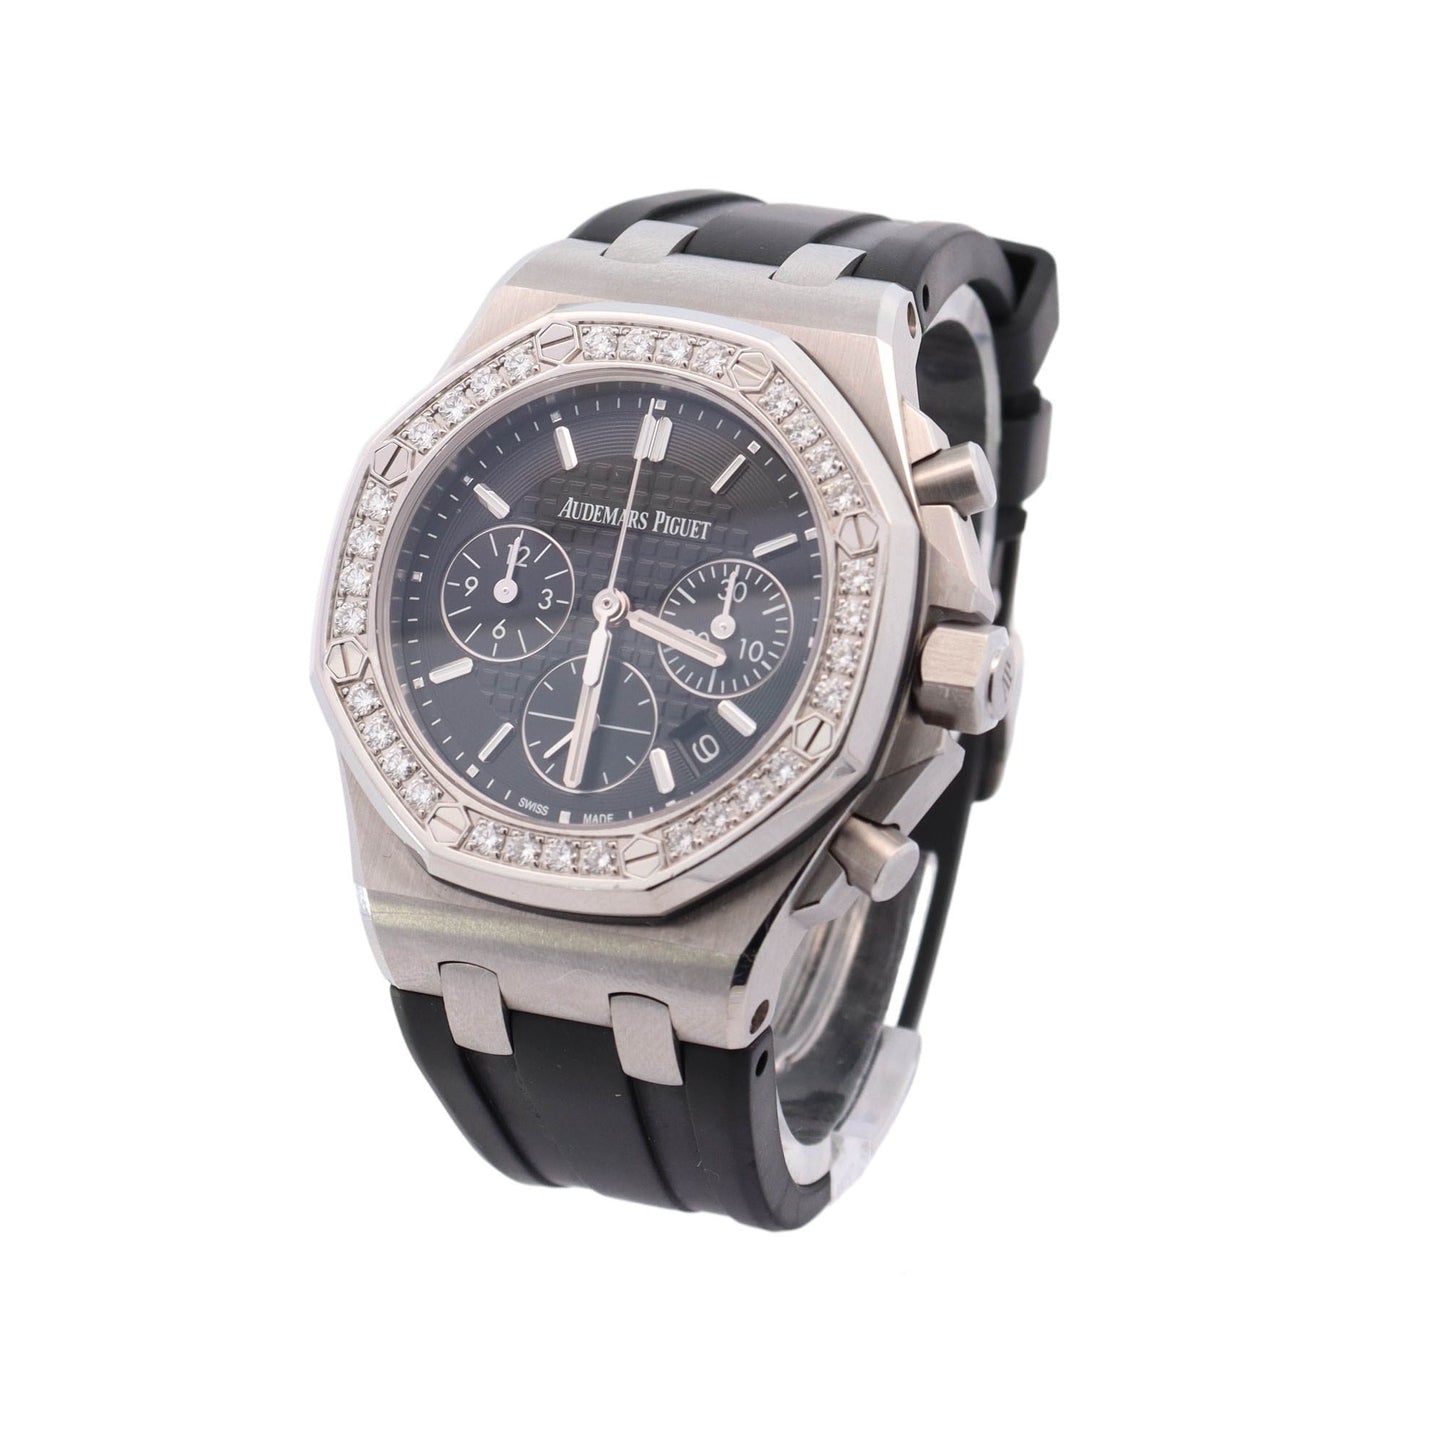 Audemars Piguet Royal Oak Offshore 37mm Stainless Steel Black Chronograph Dial Watch  Reference #: 26231ST.ZZ.D002CA.01 - Happy Jewelers Fine Jewelry Lifetime Warranty